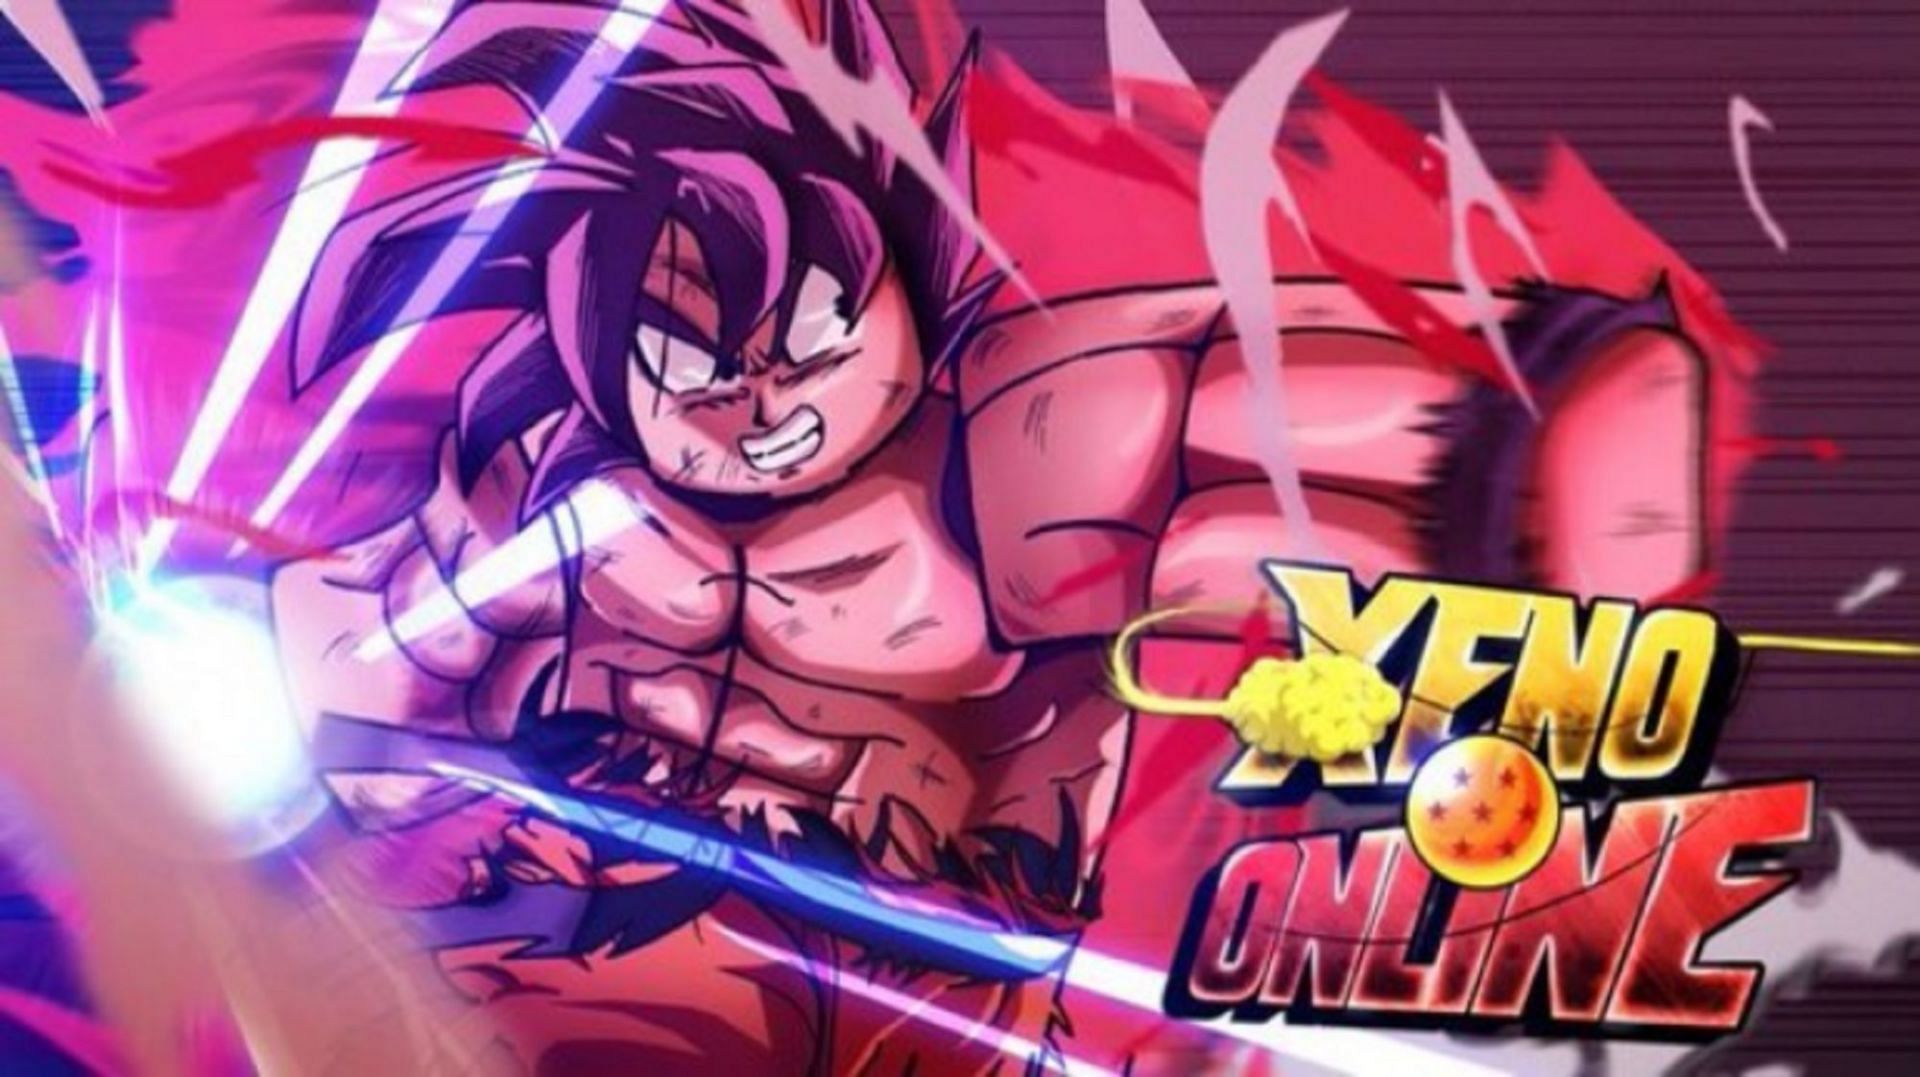 A game for fans of Goku (Image via Roblox)